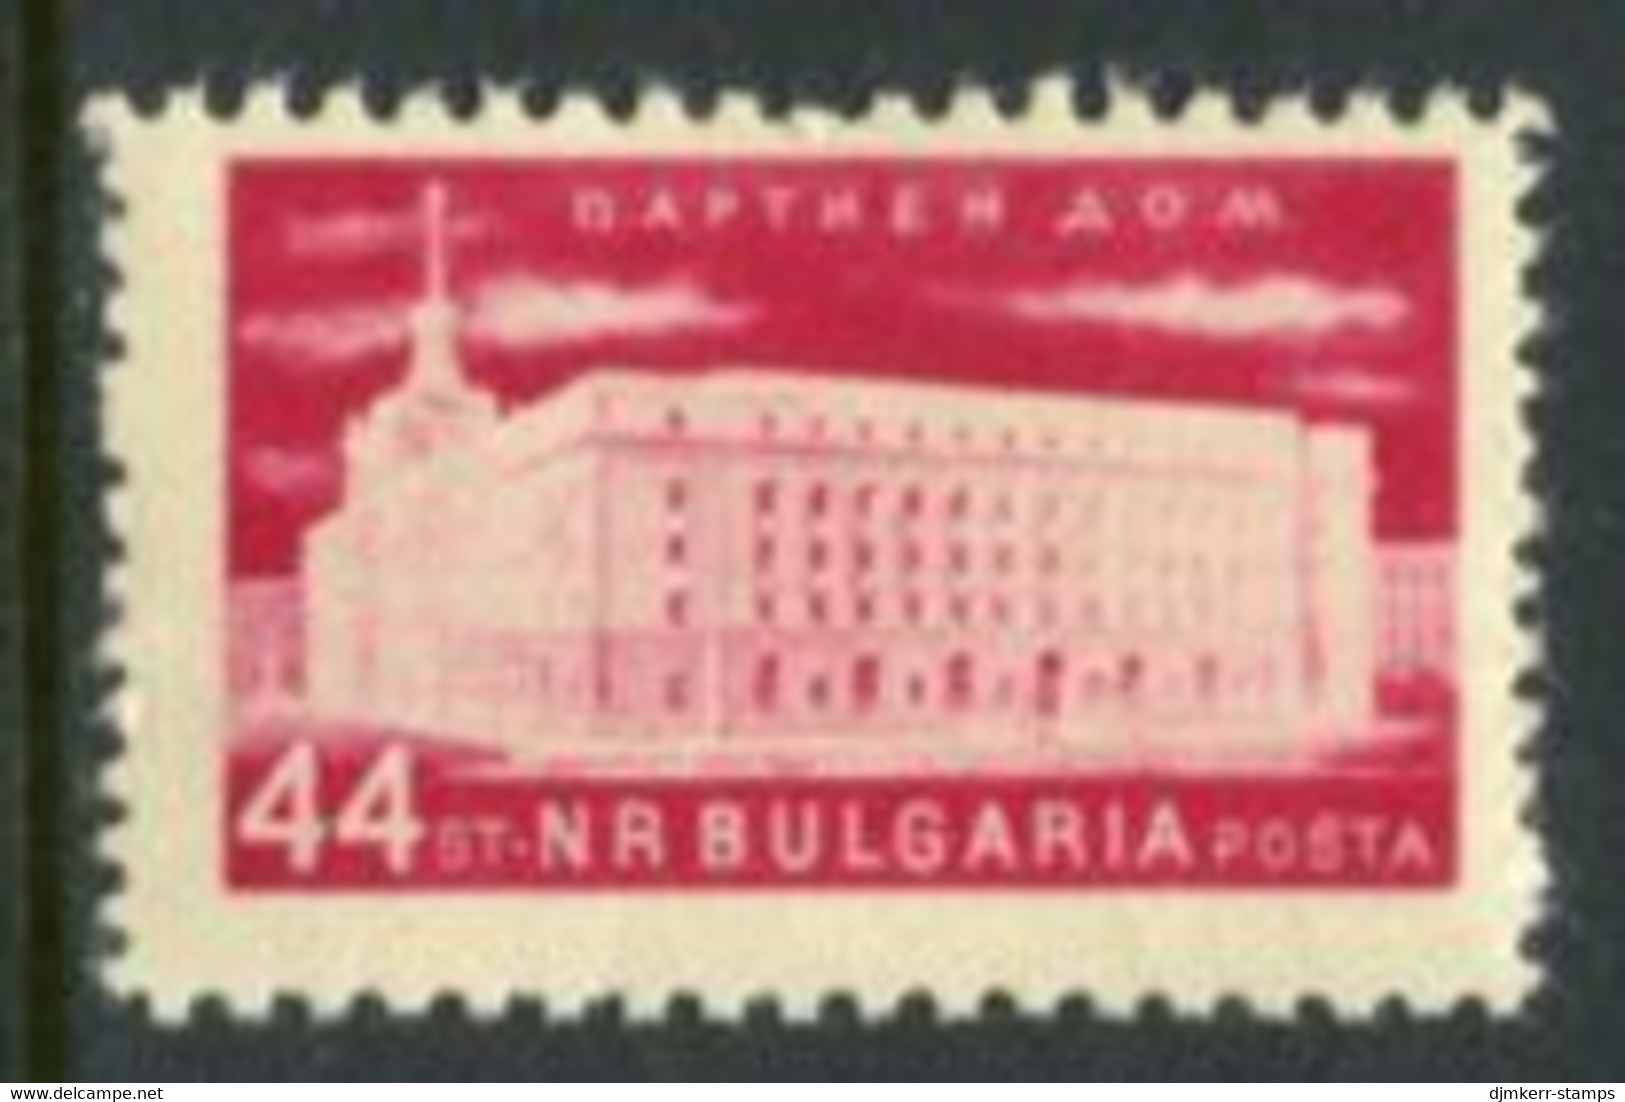 BULGARIA 1956  Industry 44 St. Change Of Colour MNH / **.  Michel 989 - Nuovi